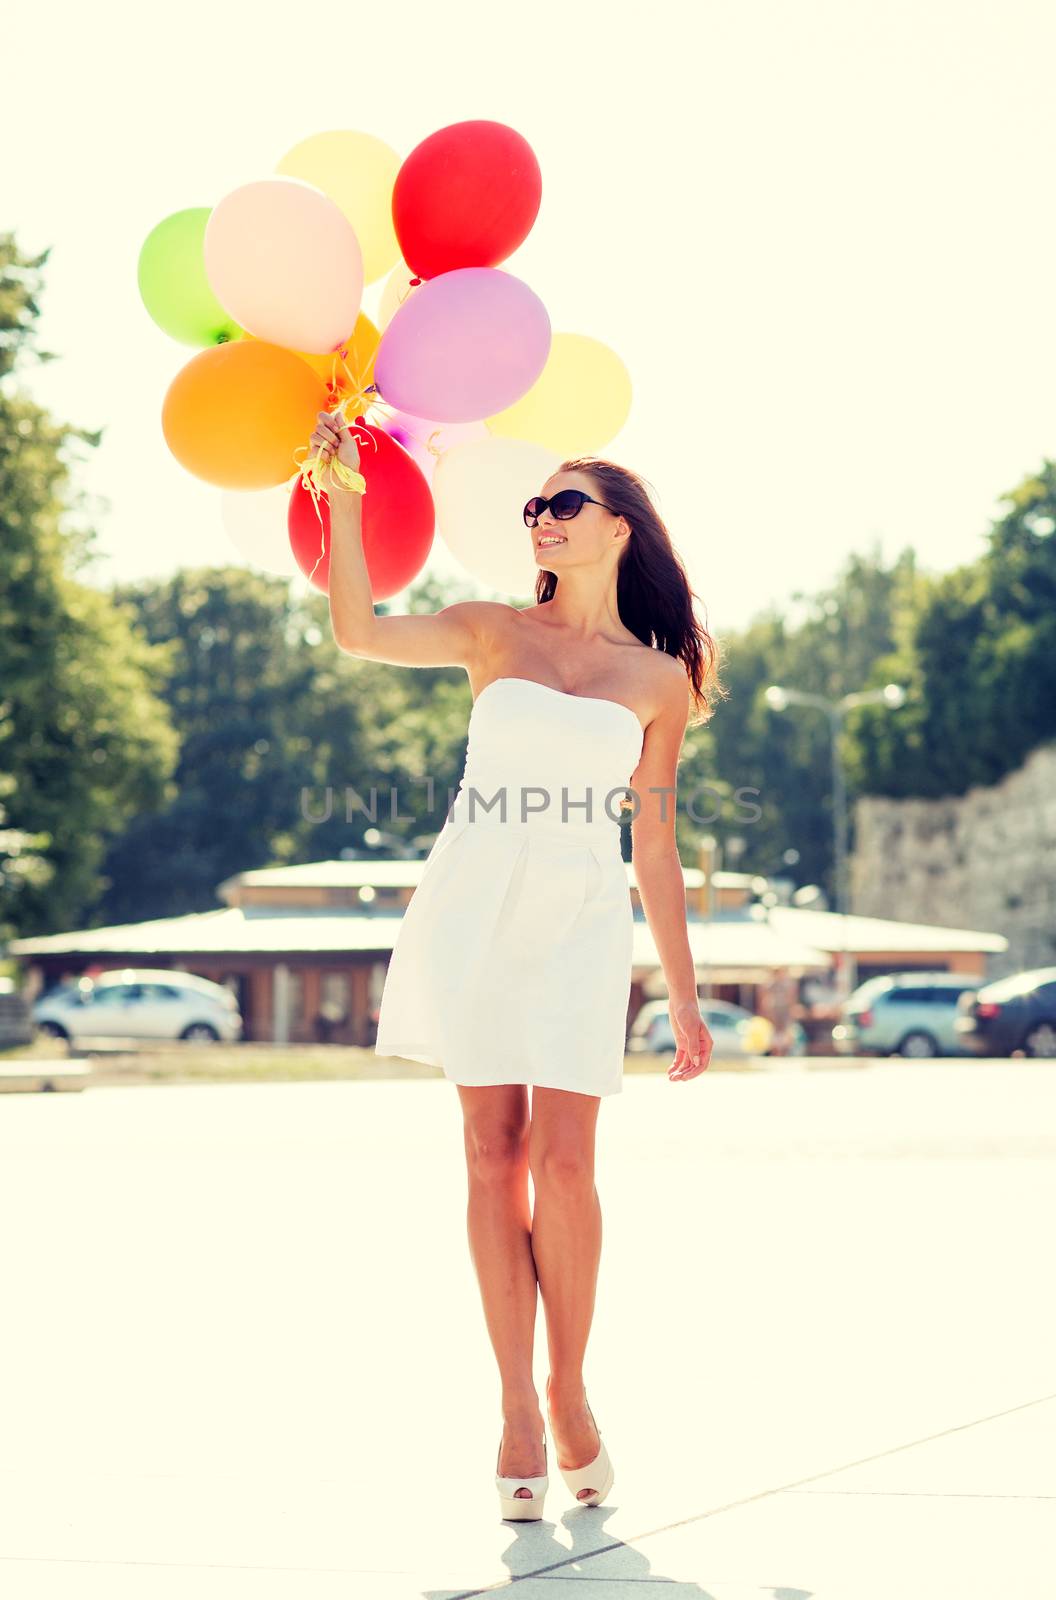 smiling young woman in sunglasses with balloons by dolgachov